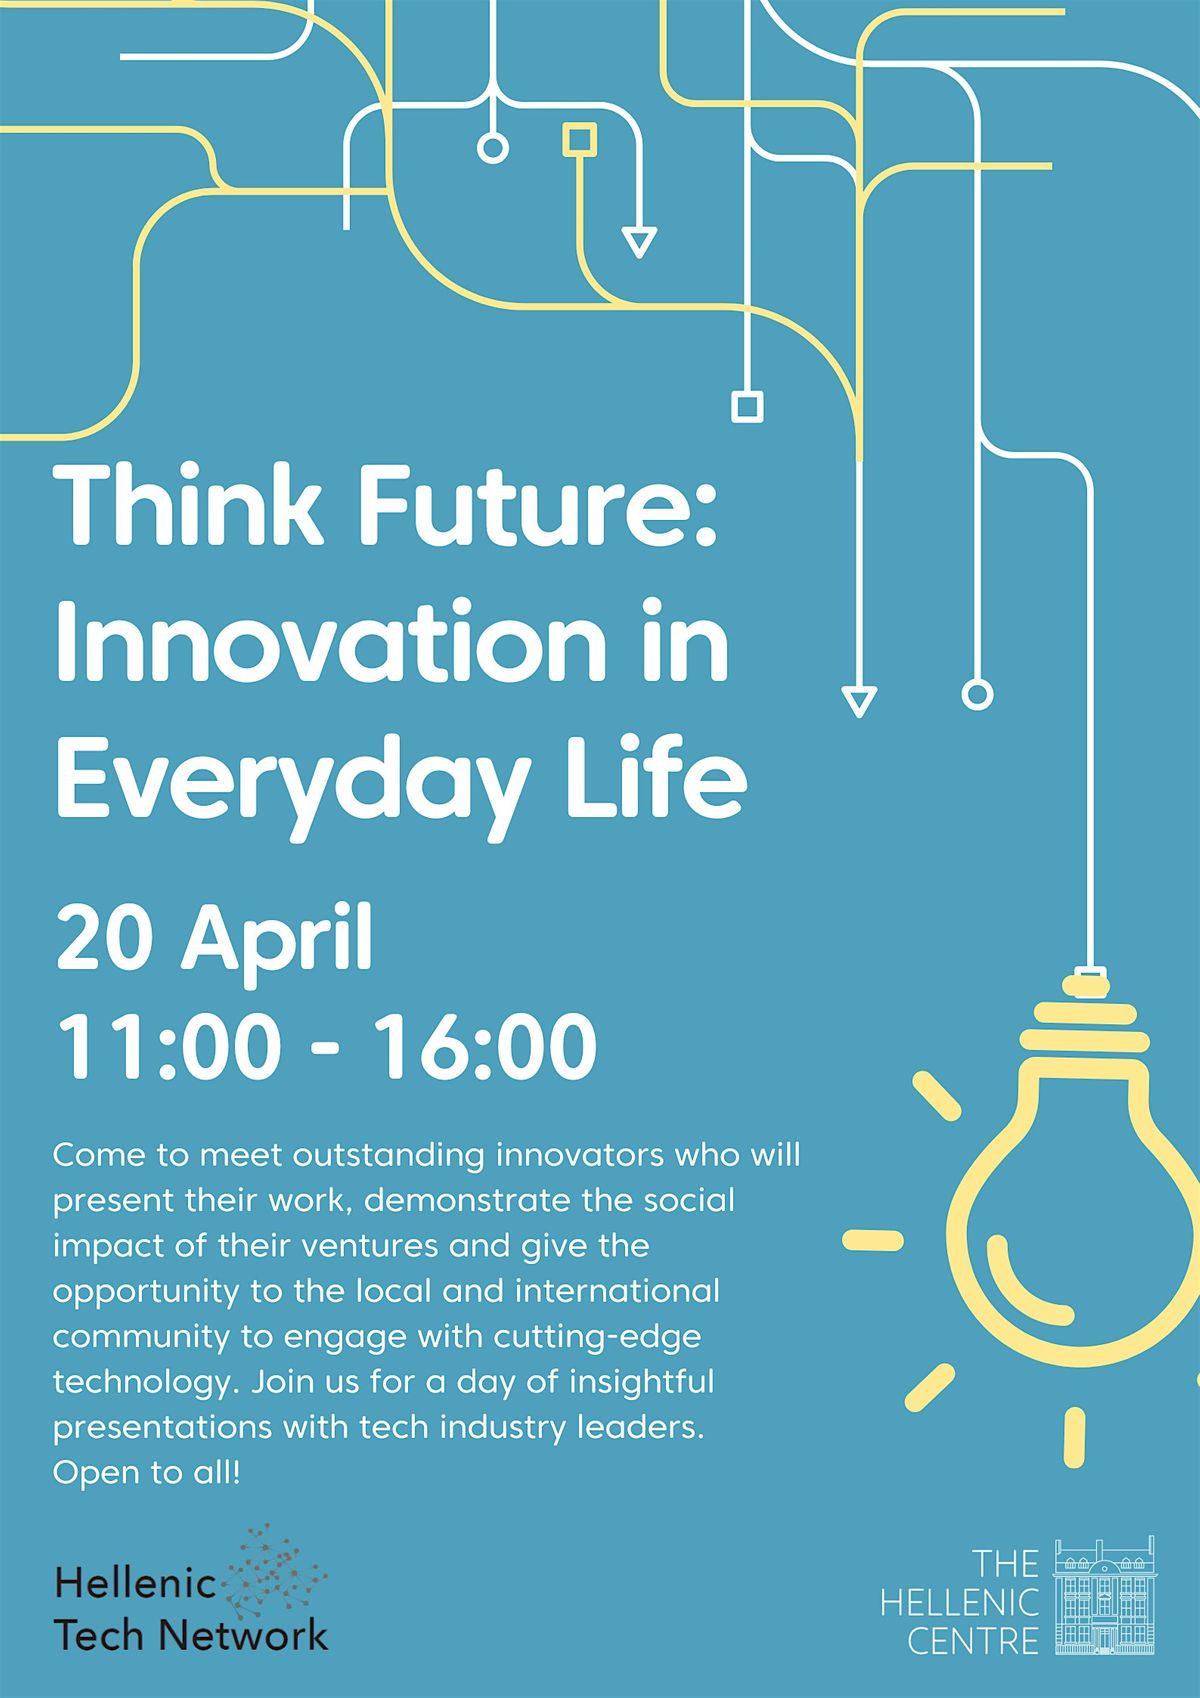 Think Future: Innovation in Everyday Life